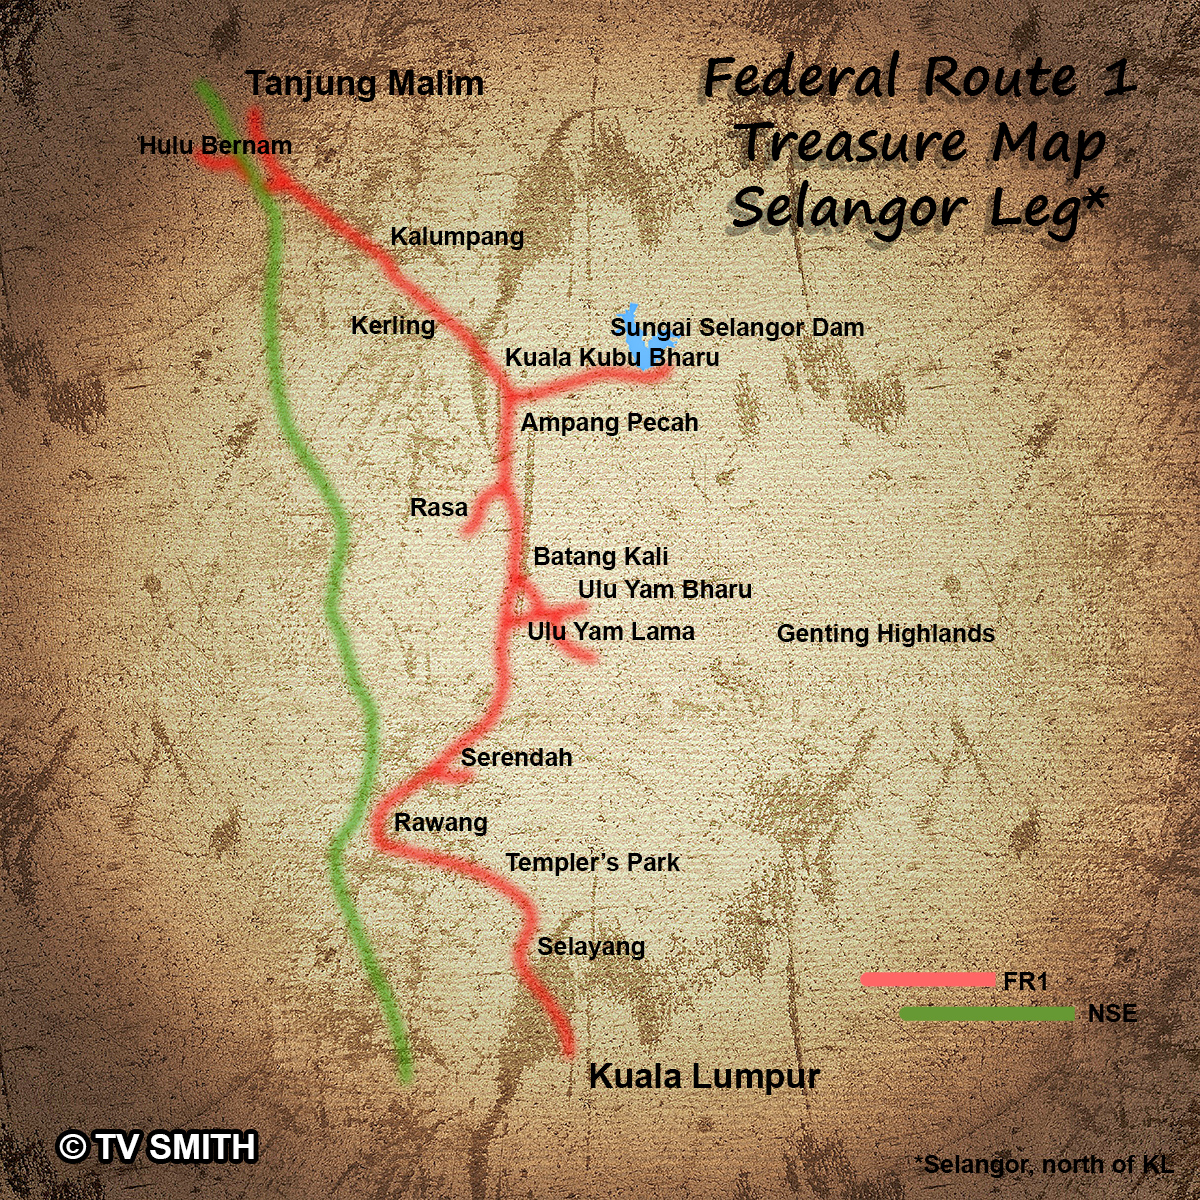 Map Of TV Smith's Federal Route 1 Travel